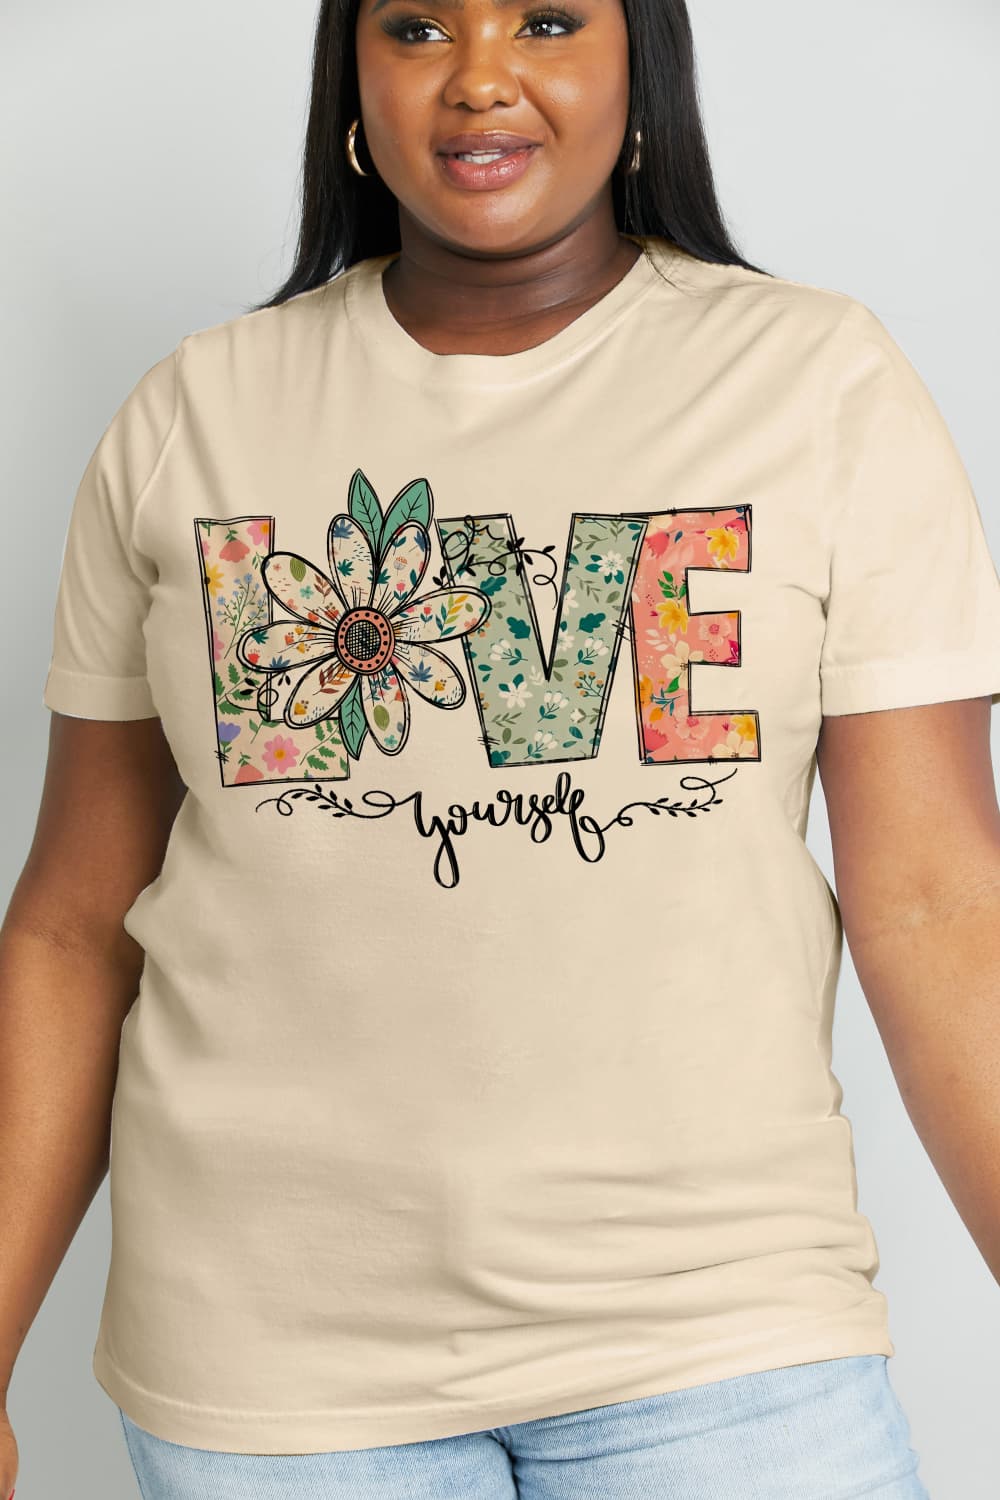 Full Size LOVE YOURSELF Graphic Cotton Tee